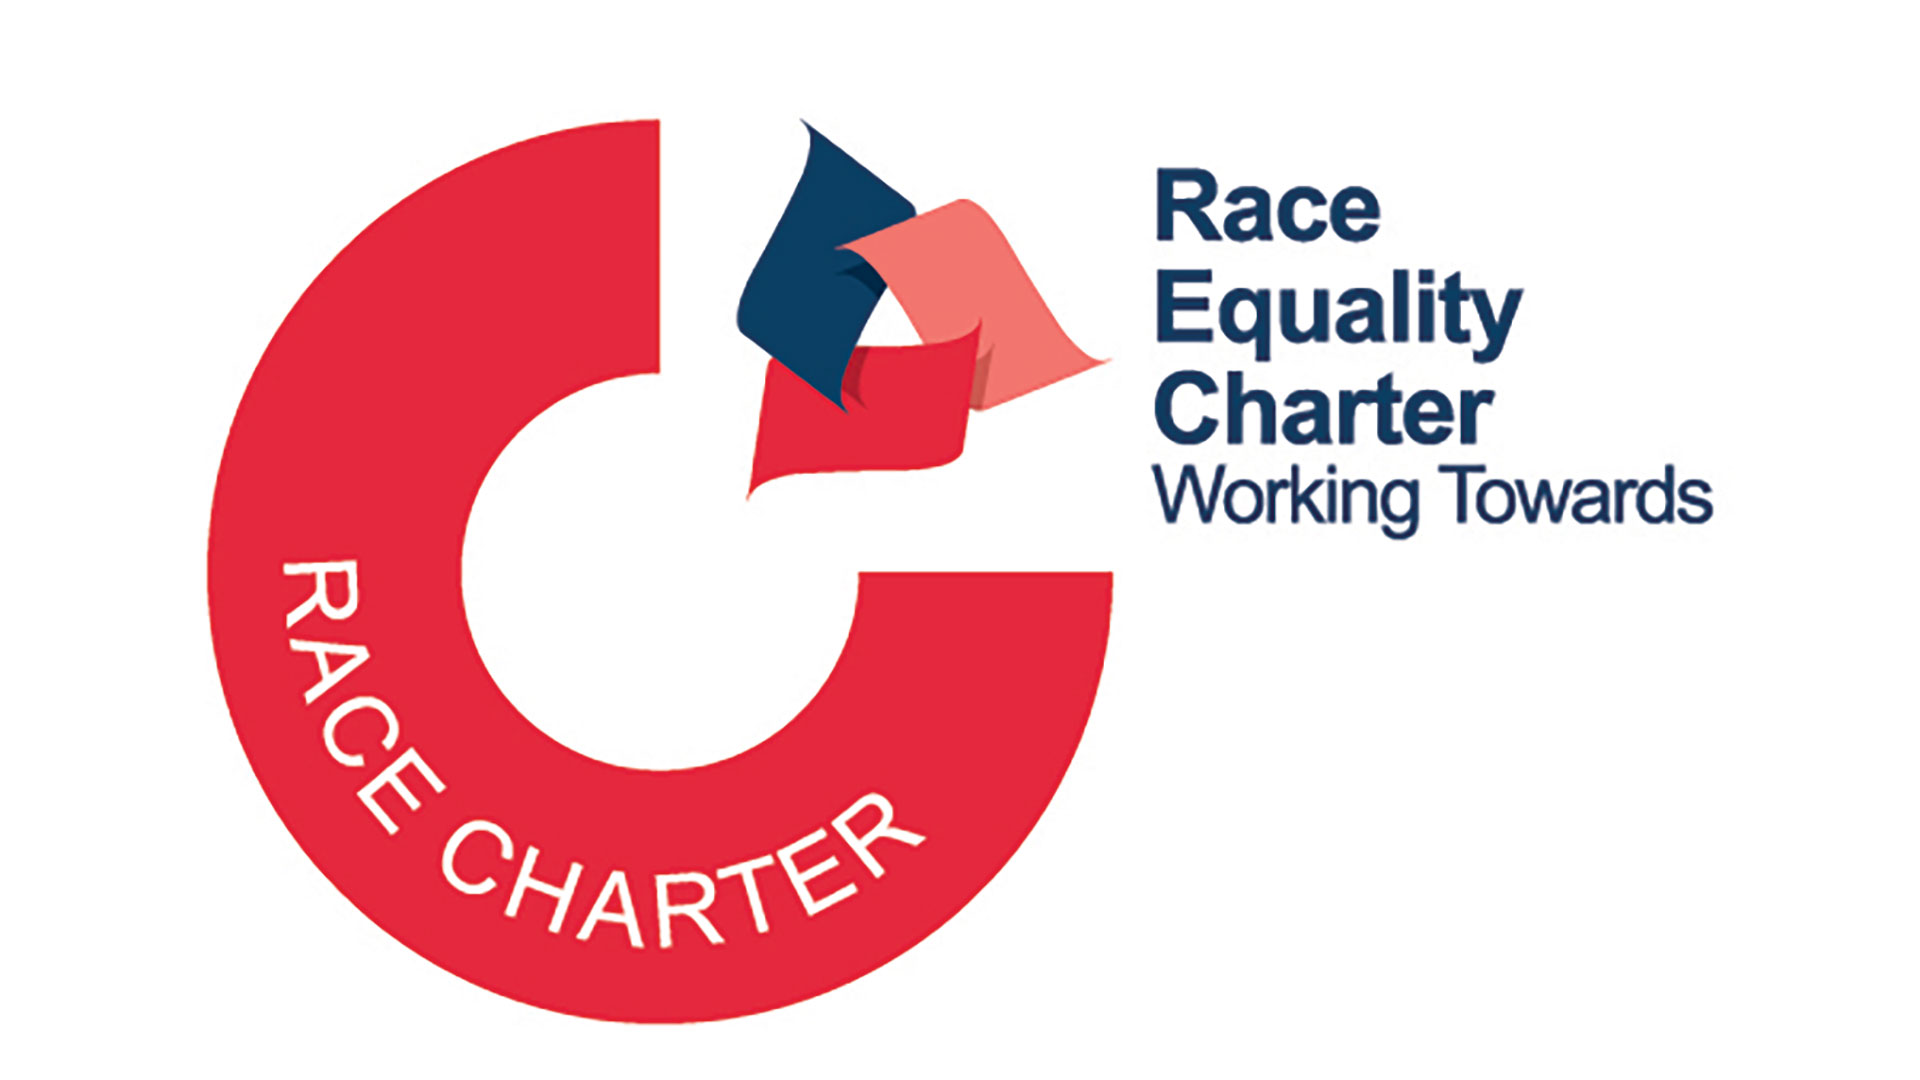 University signs the Race Equality Charter